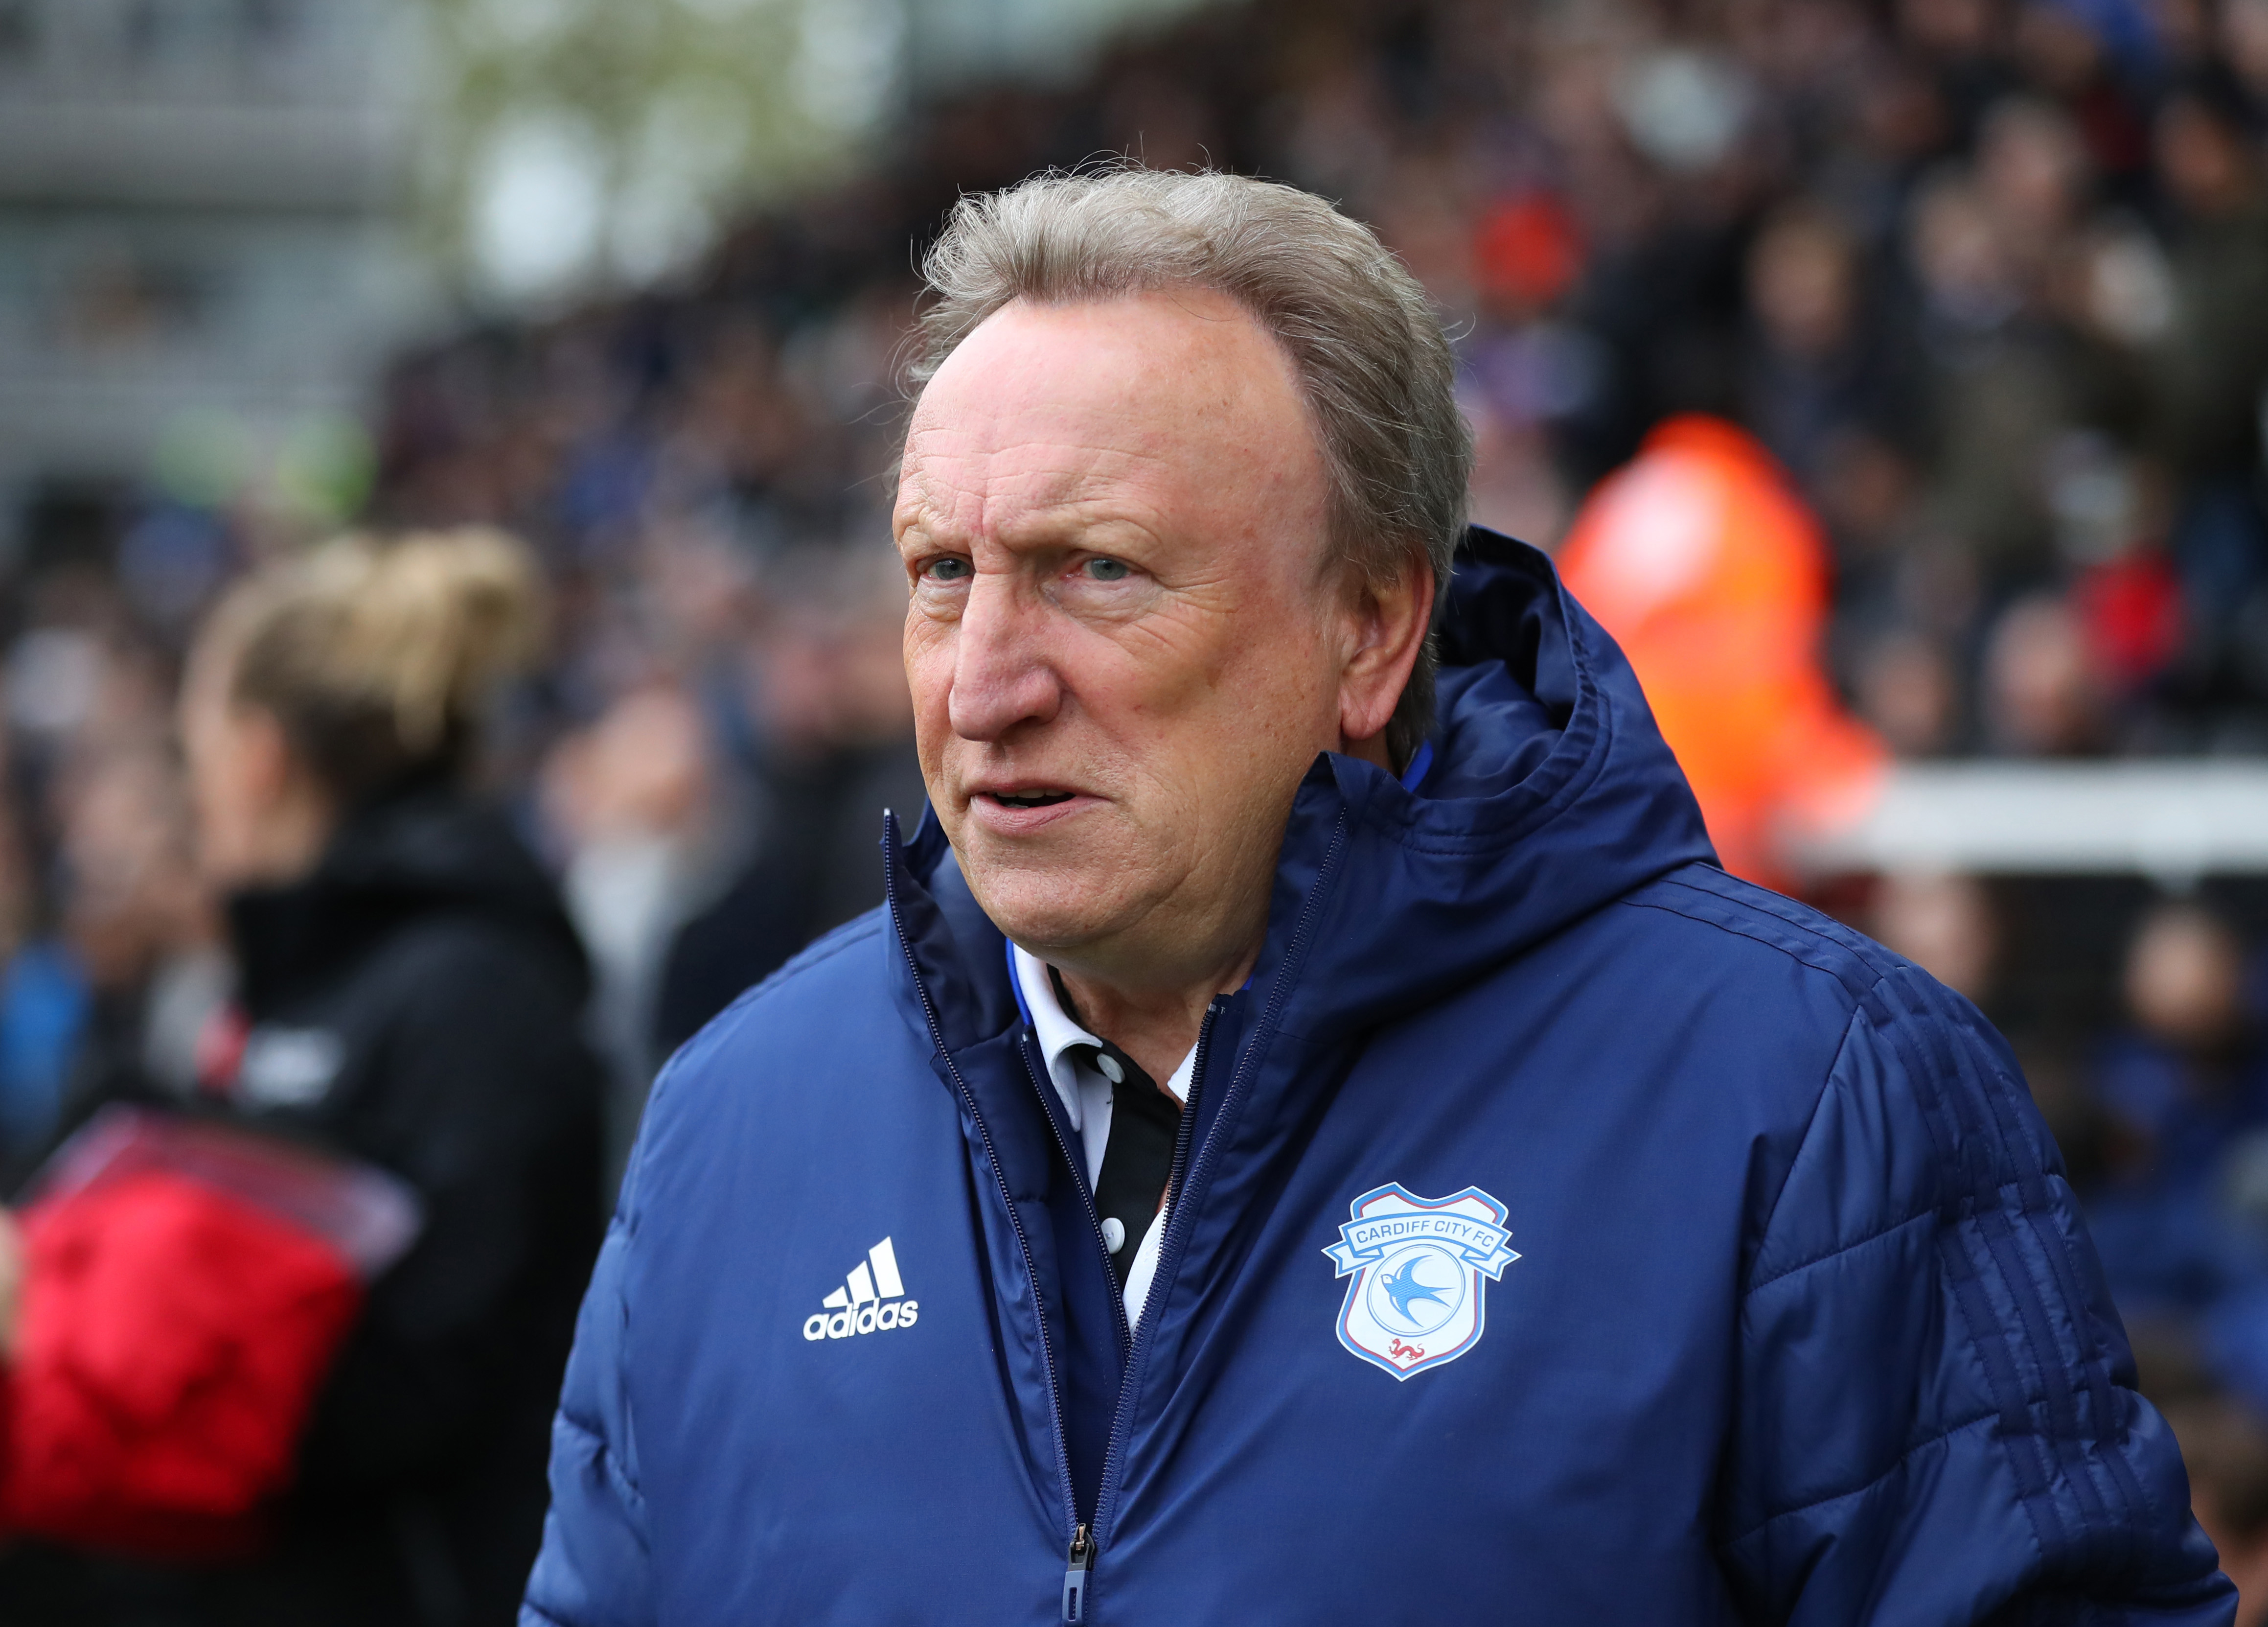 LONDON, ENGLAND - APRIL 27: Neil Warnock manager of Cardiff City  during the Premier League match between Fulham FC and Cardiff City at Craven Cottage on April 27, 2019 in London, United Kingdom. (Photo by Catherine Ivill/Getty Images)